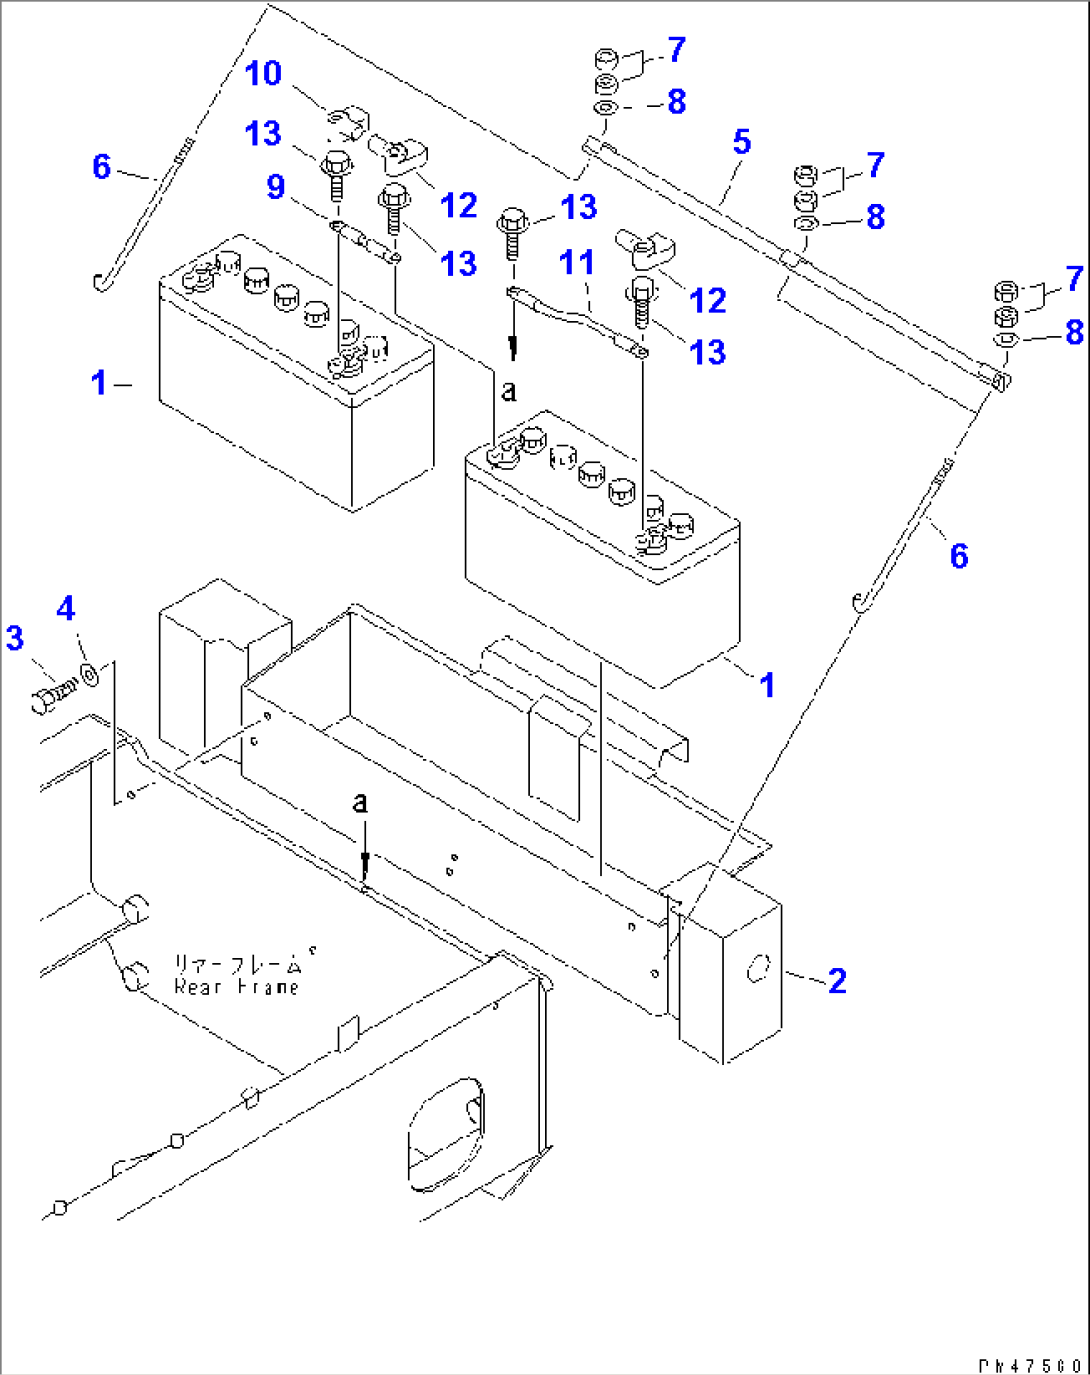 BATTERY AND BATTERY BOX(#60001-)